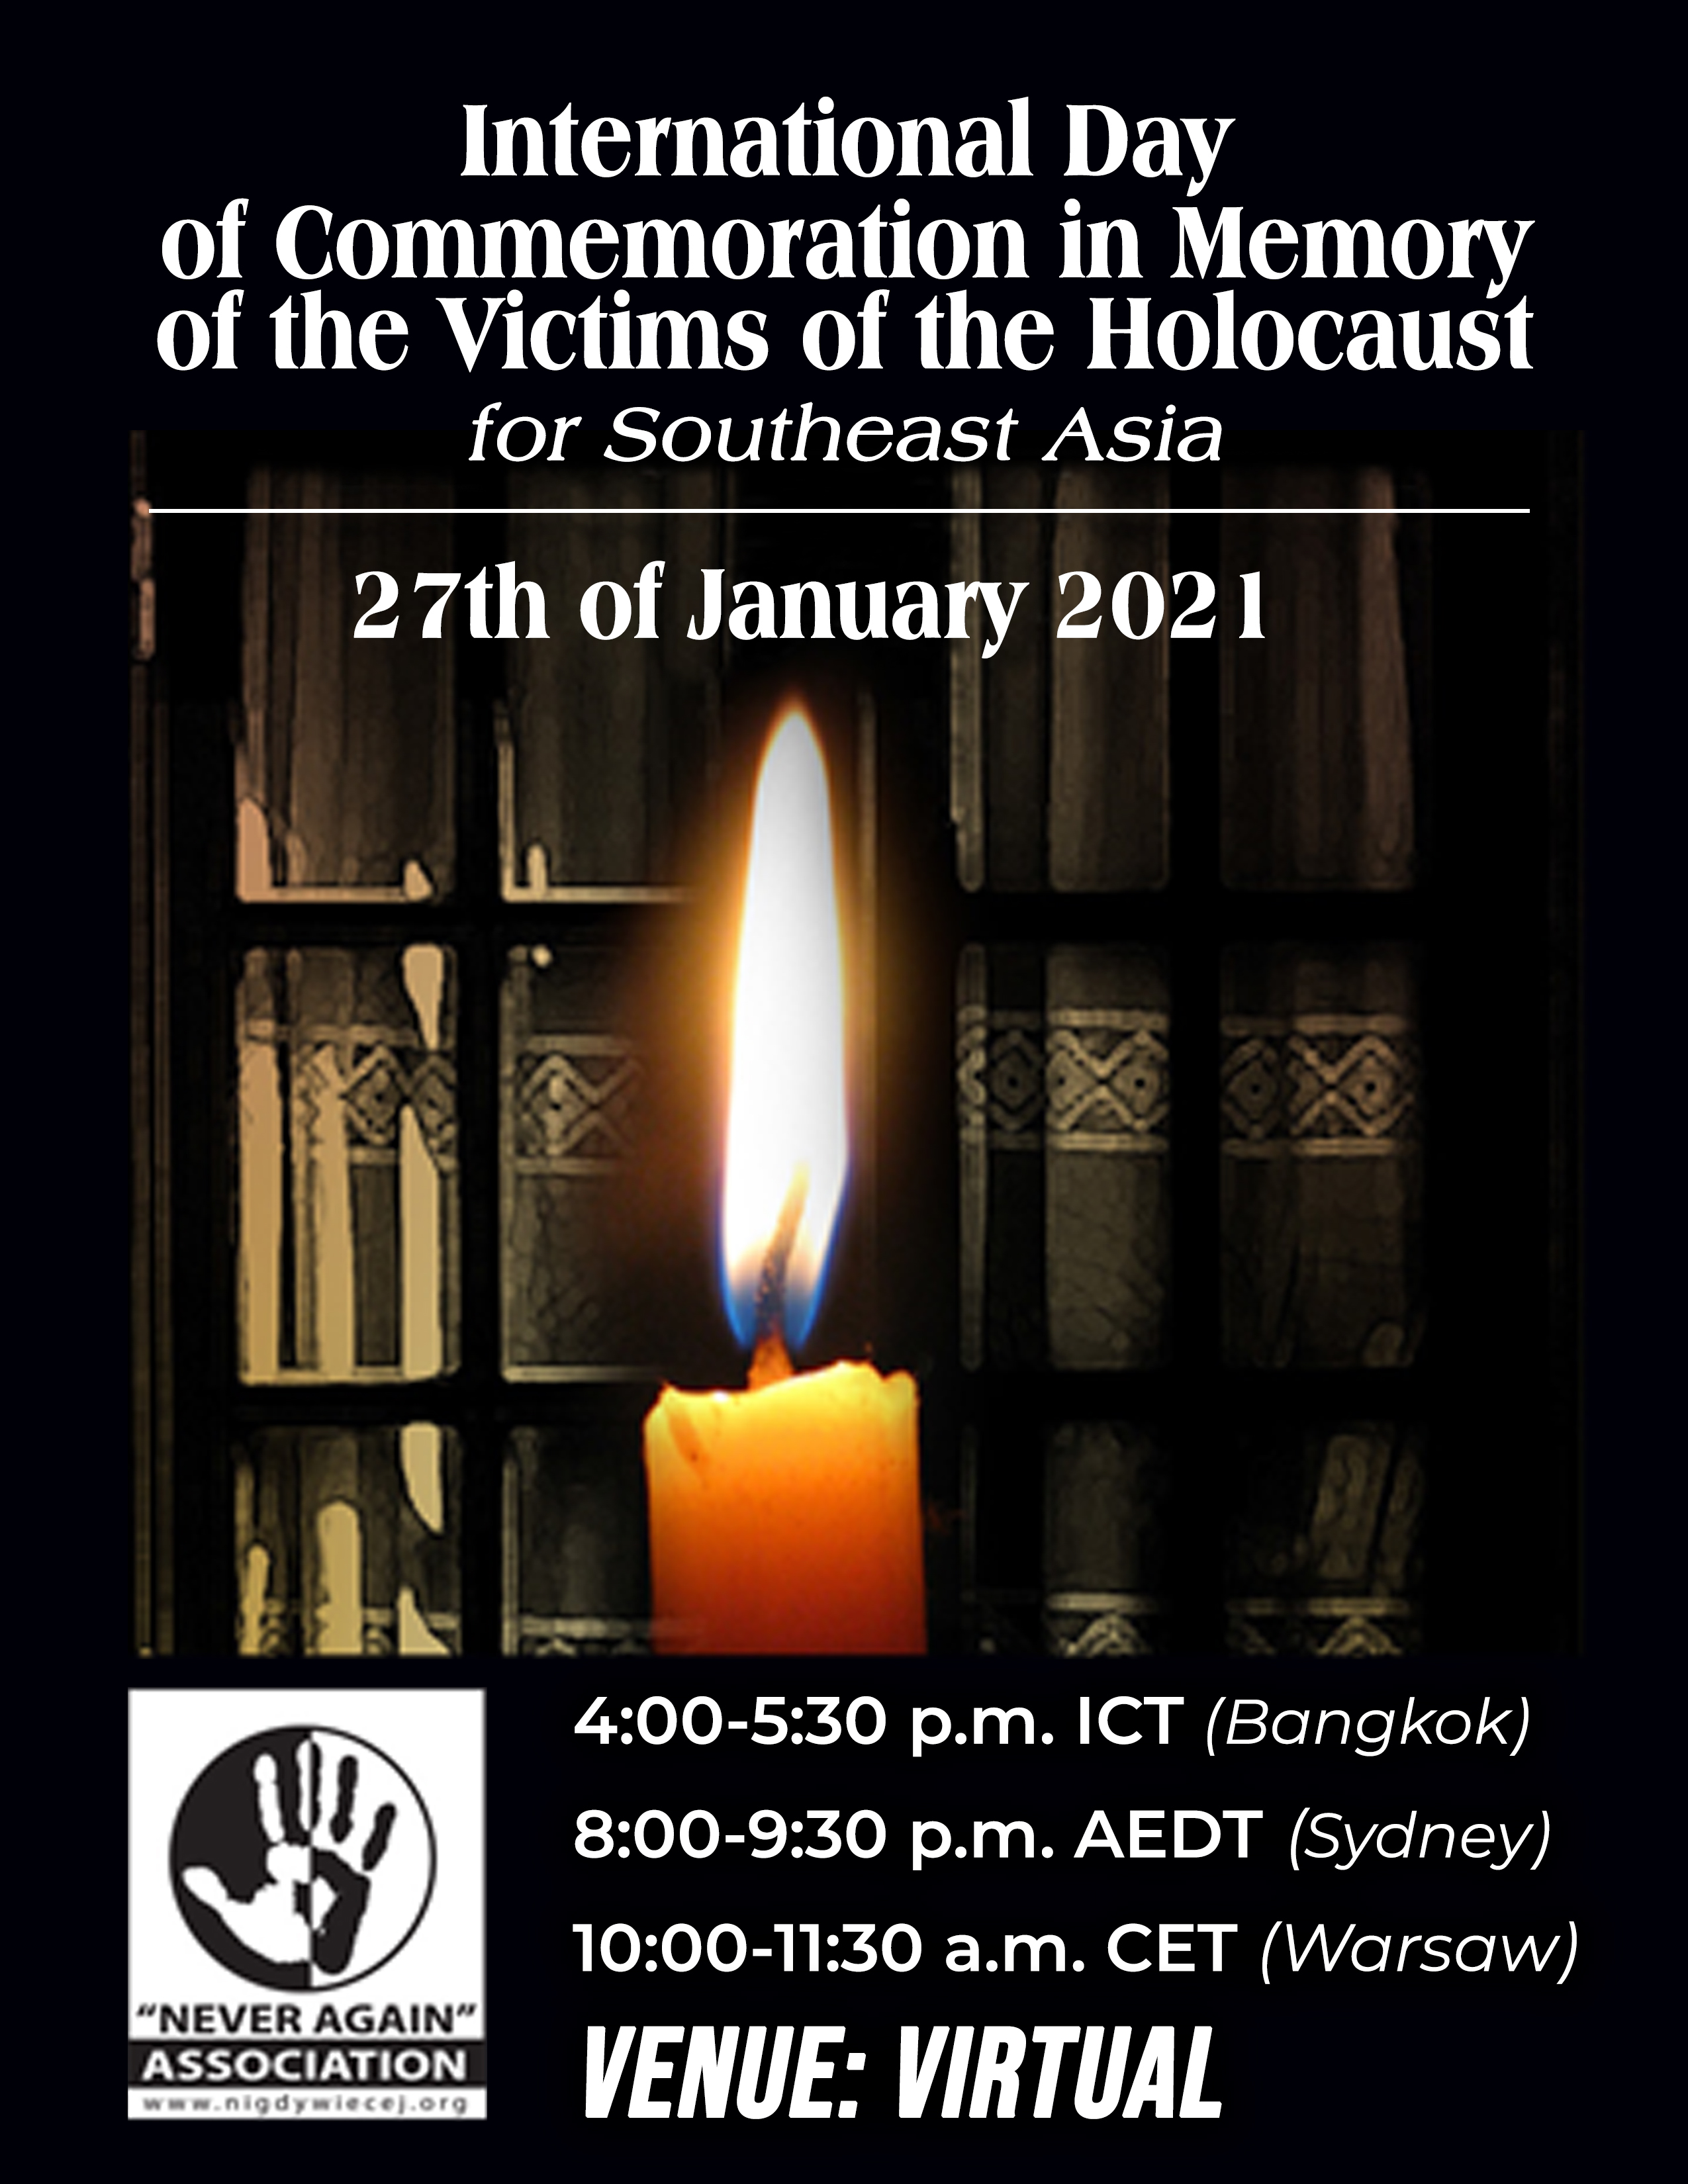 HOLOCAUST COMMEMORATION AND COUNTERING GENOCIDE DENIAL IN SOUTHEAST ASIA